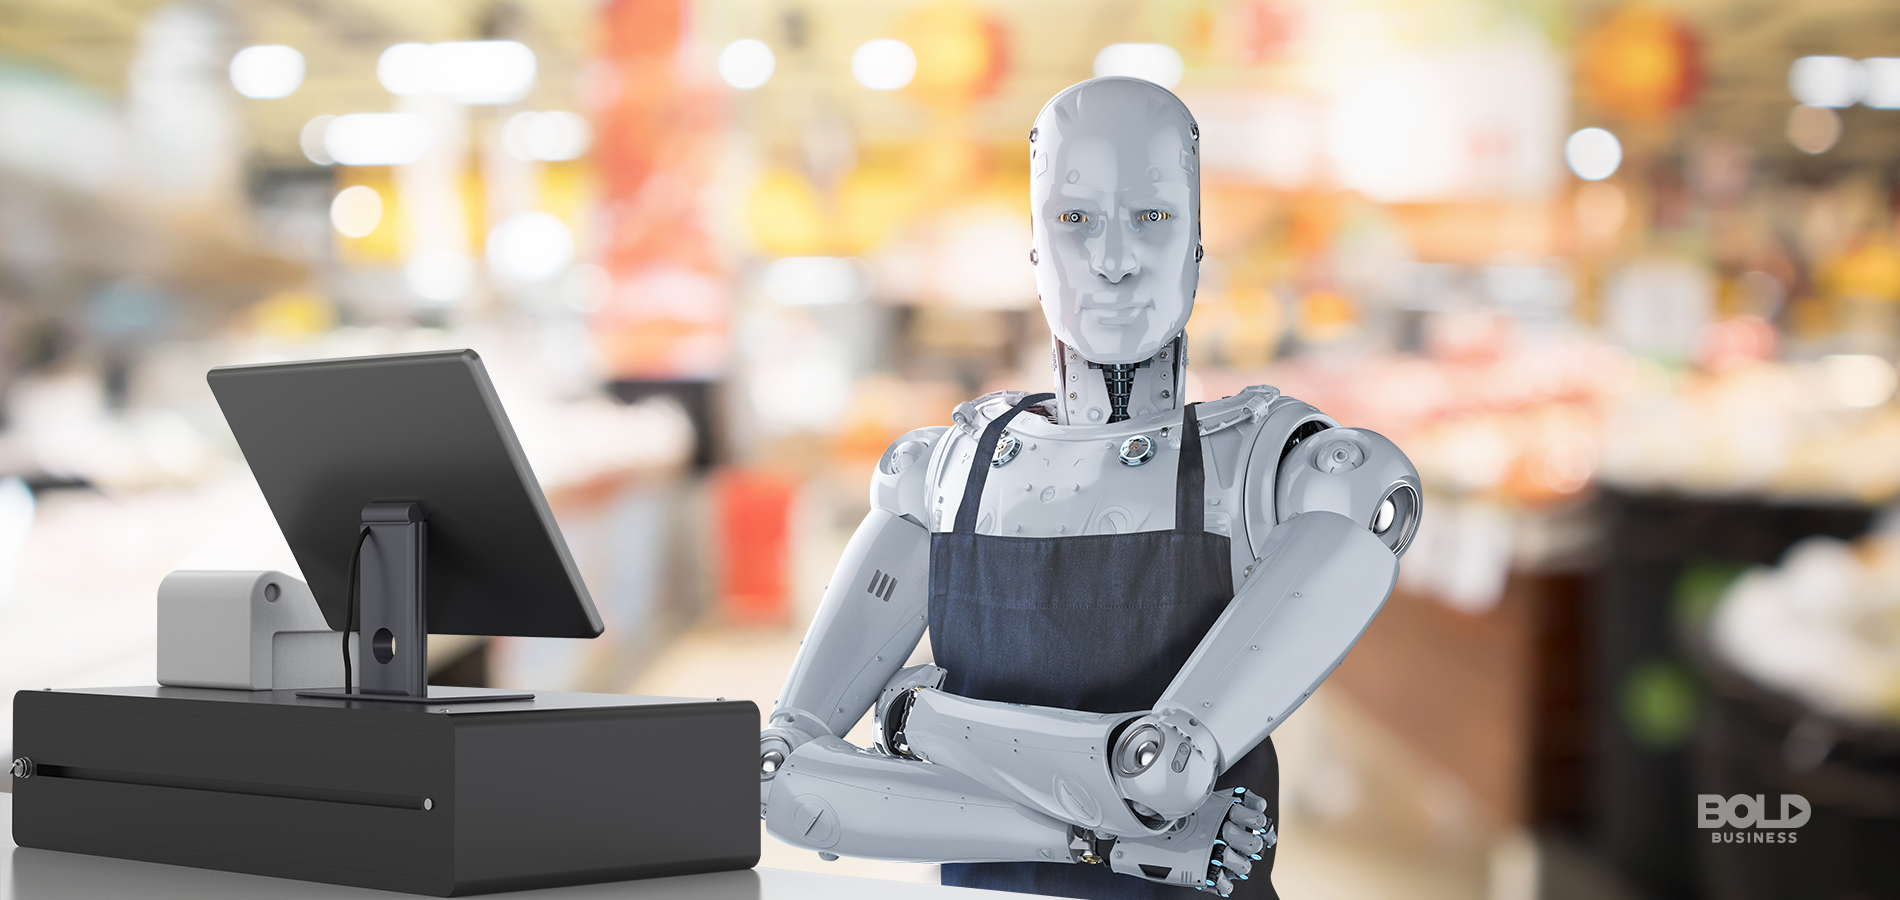 Customer Service and Circuits: Walmart, McDonalds and the Emerging Robotic Labor Force